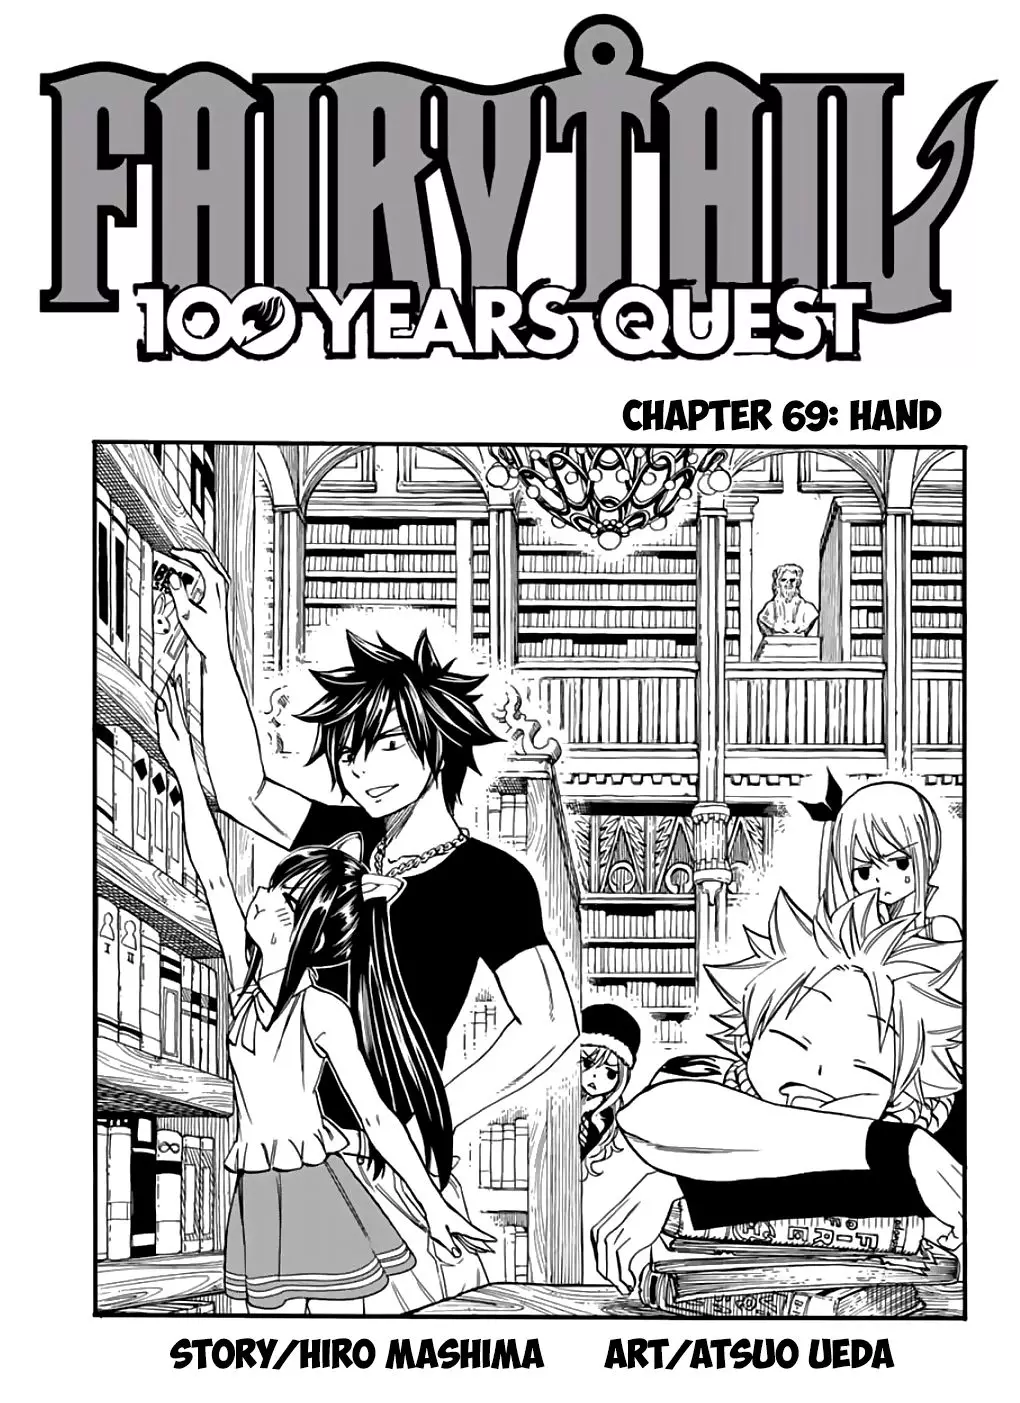 Fairy Tail: 100 Years Quest - 69 page 1